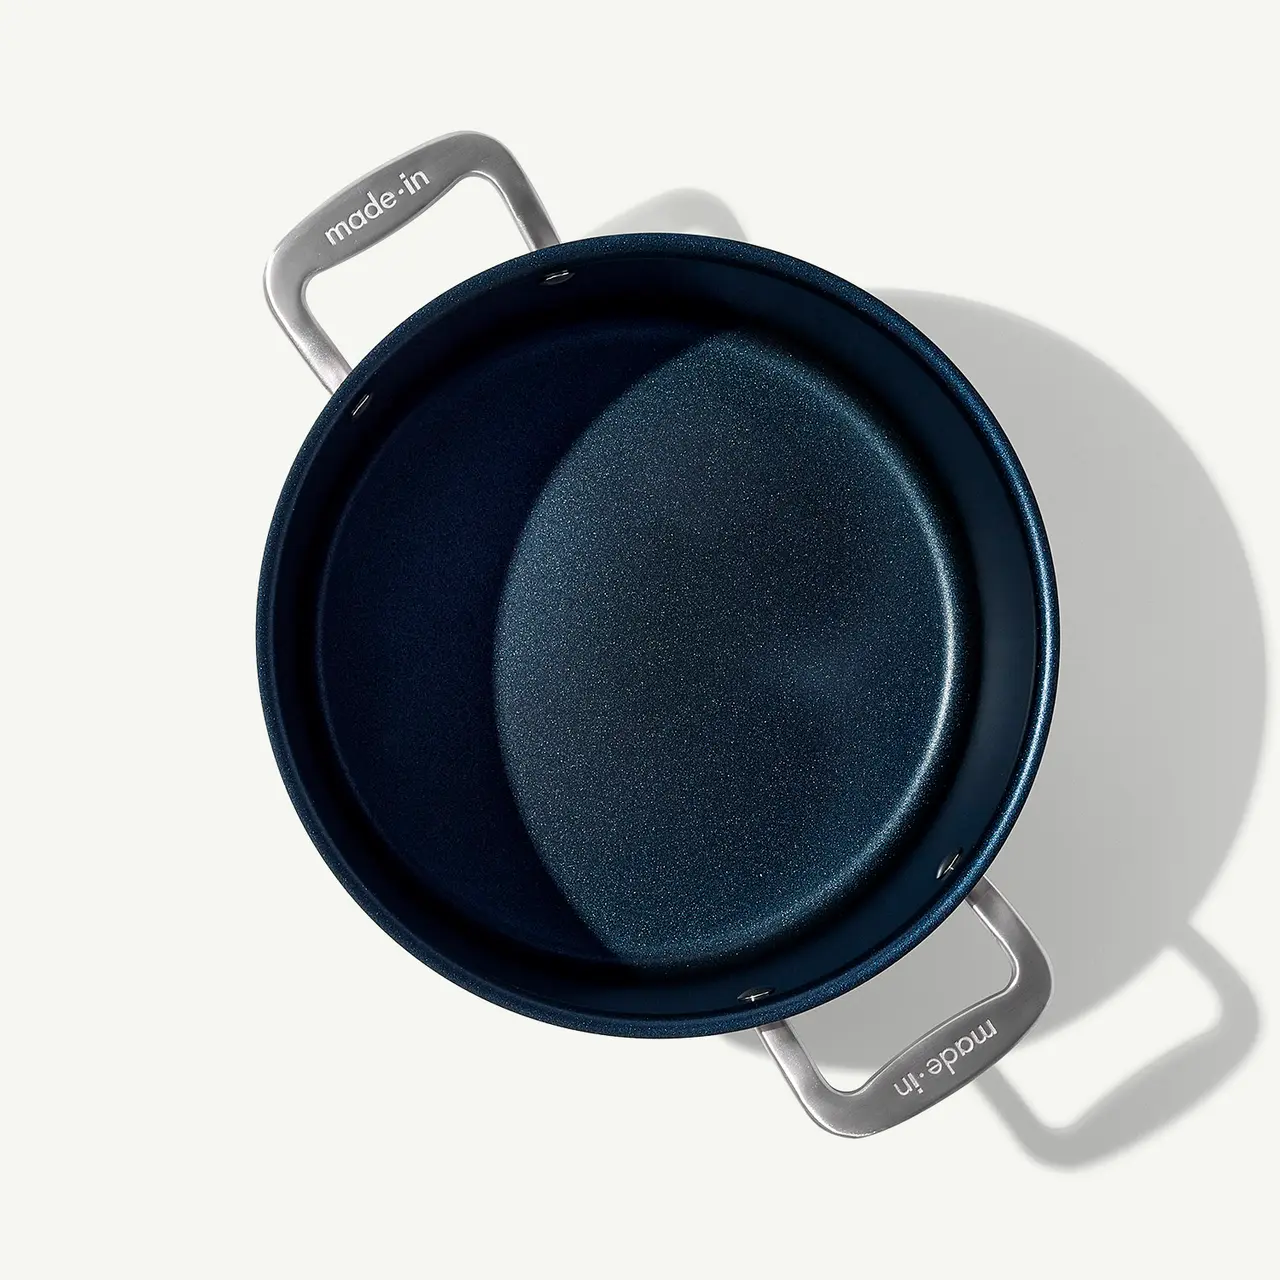 A non-stick frying pan is shown from above, casting a shadow on a light surface, with visible handles and brand markings.